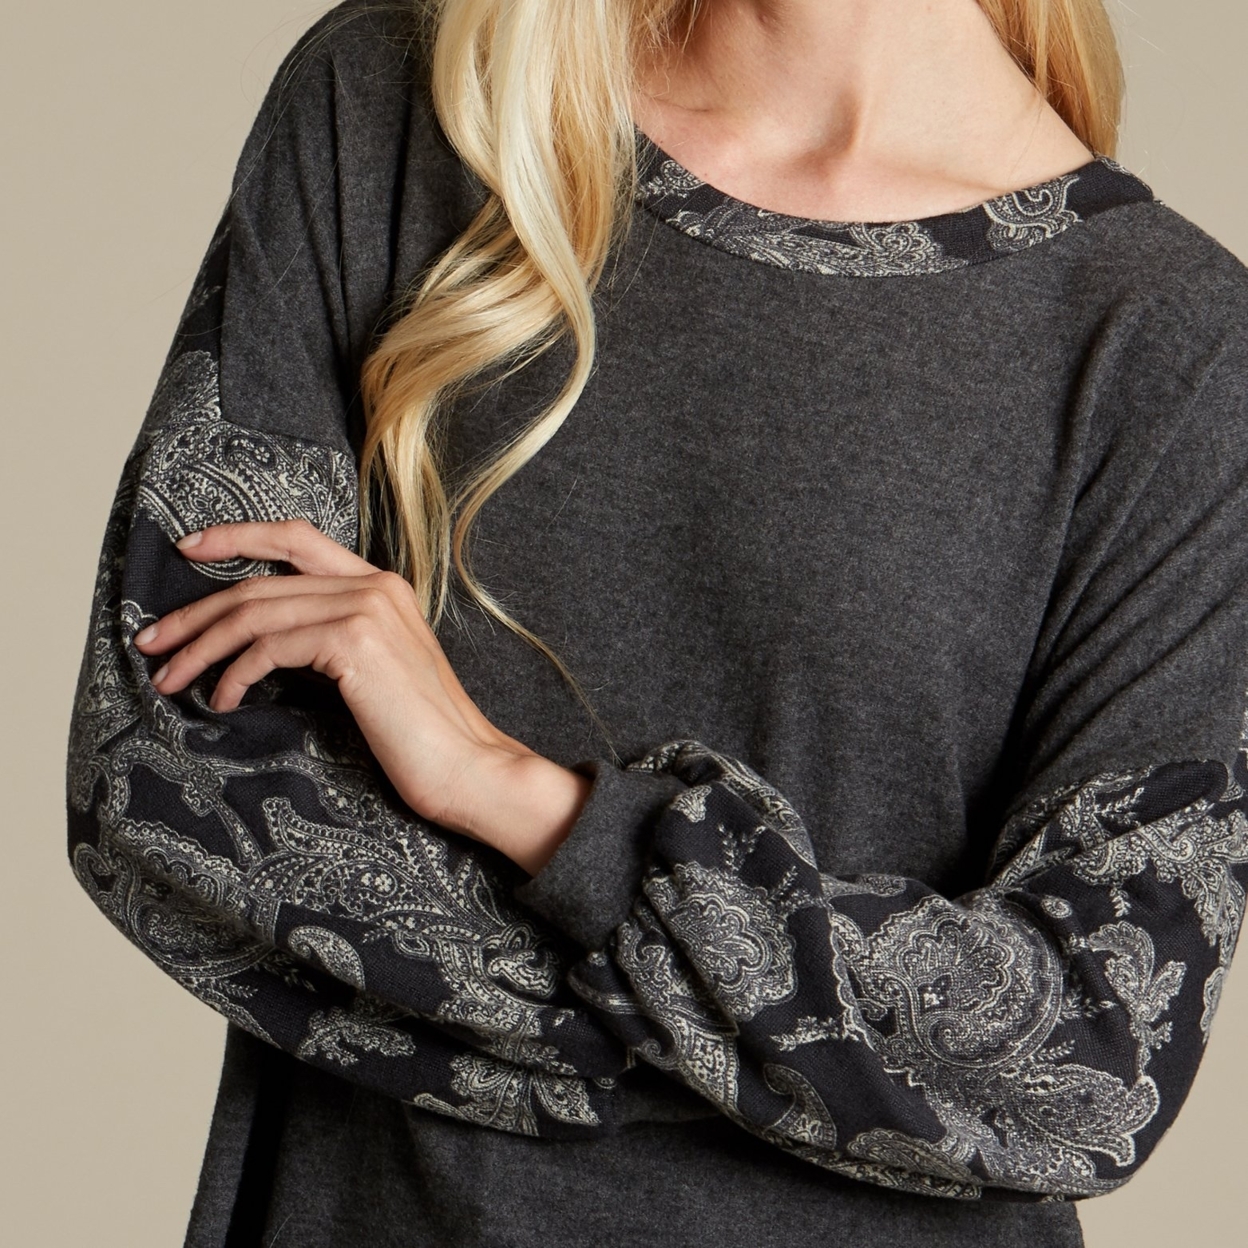 Brushed Cashmere Sweater - Charcoal, Extra Large (16)